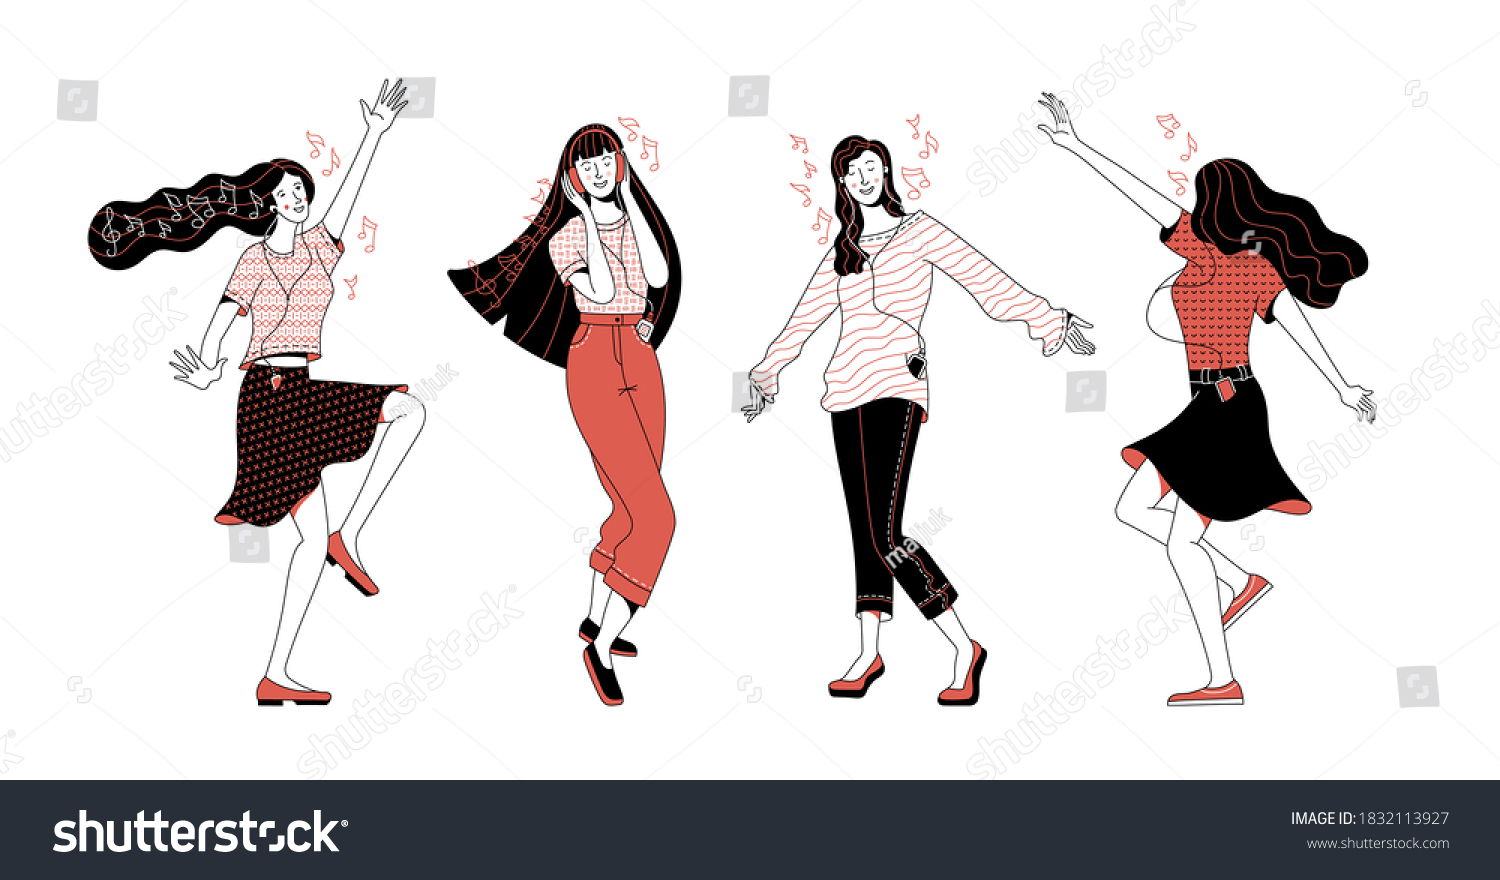 SVG of Collection of joyful young blonde and brunette women characters dancing at party and music notes on white background as hedonism and freedom concept svg